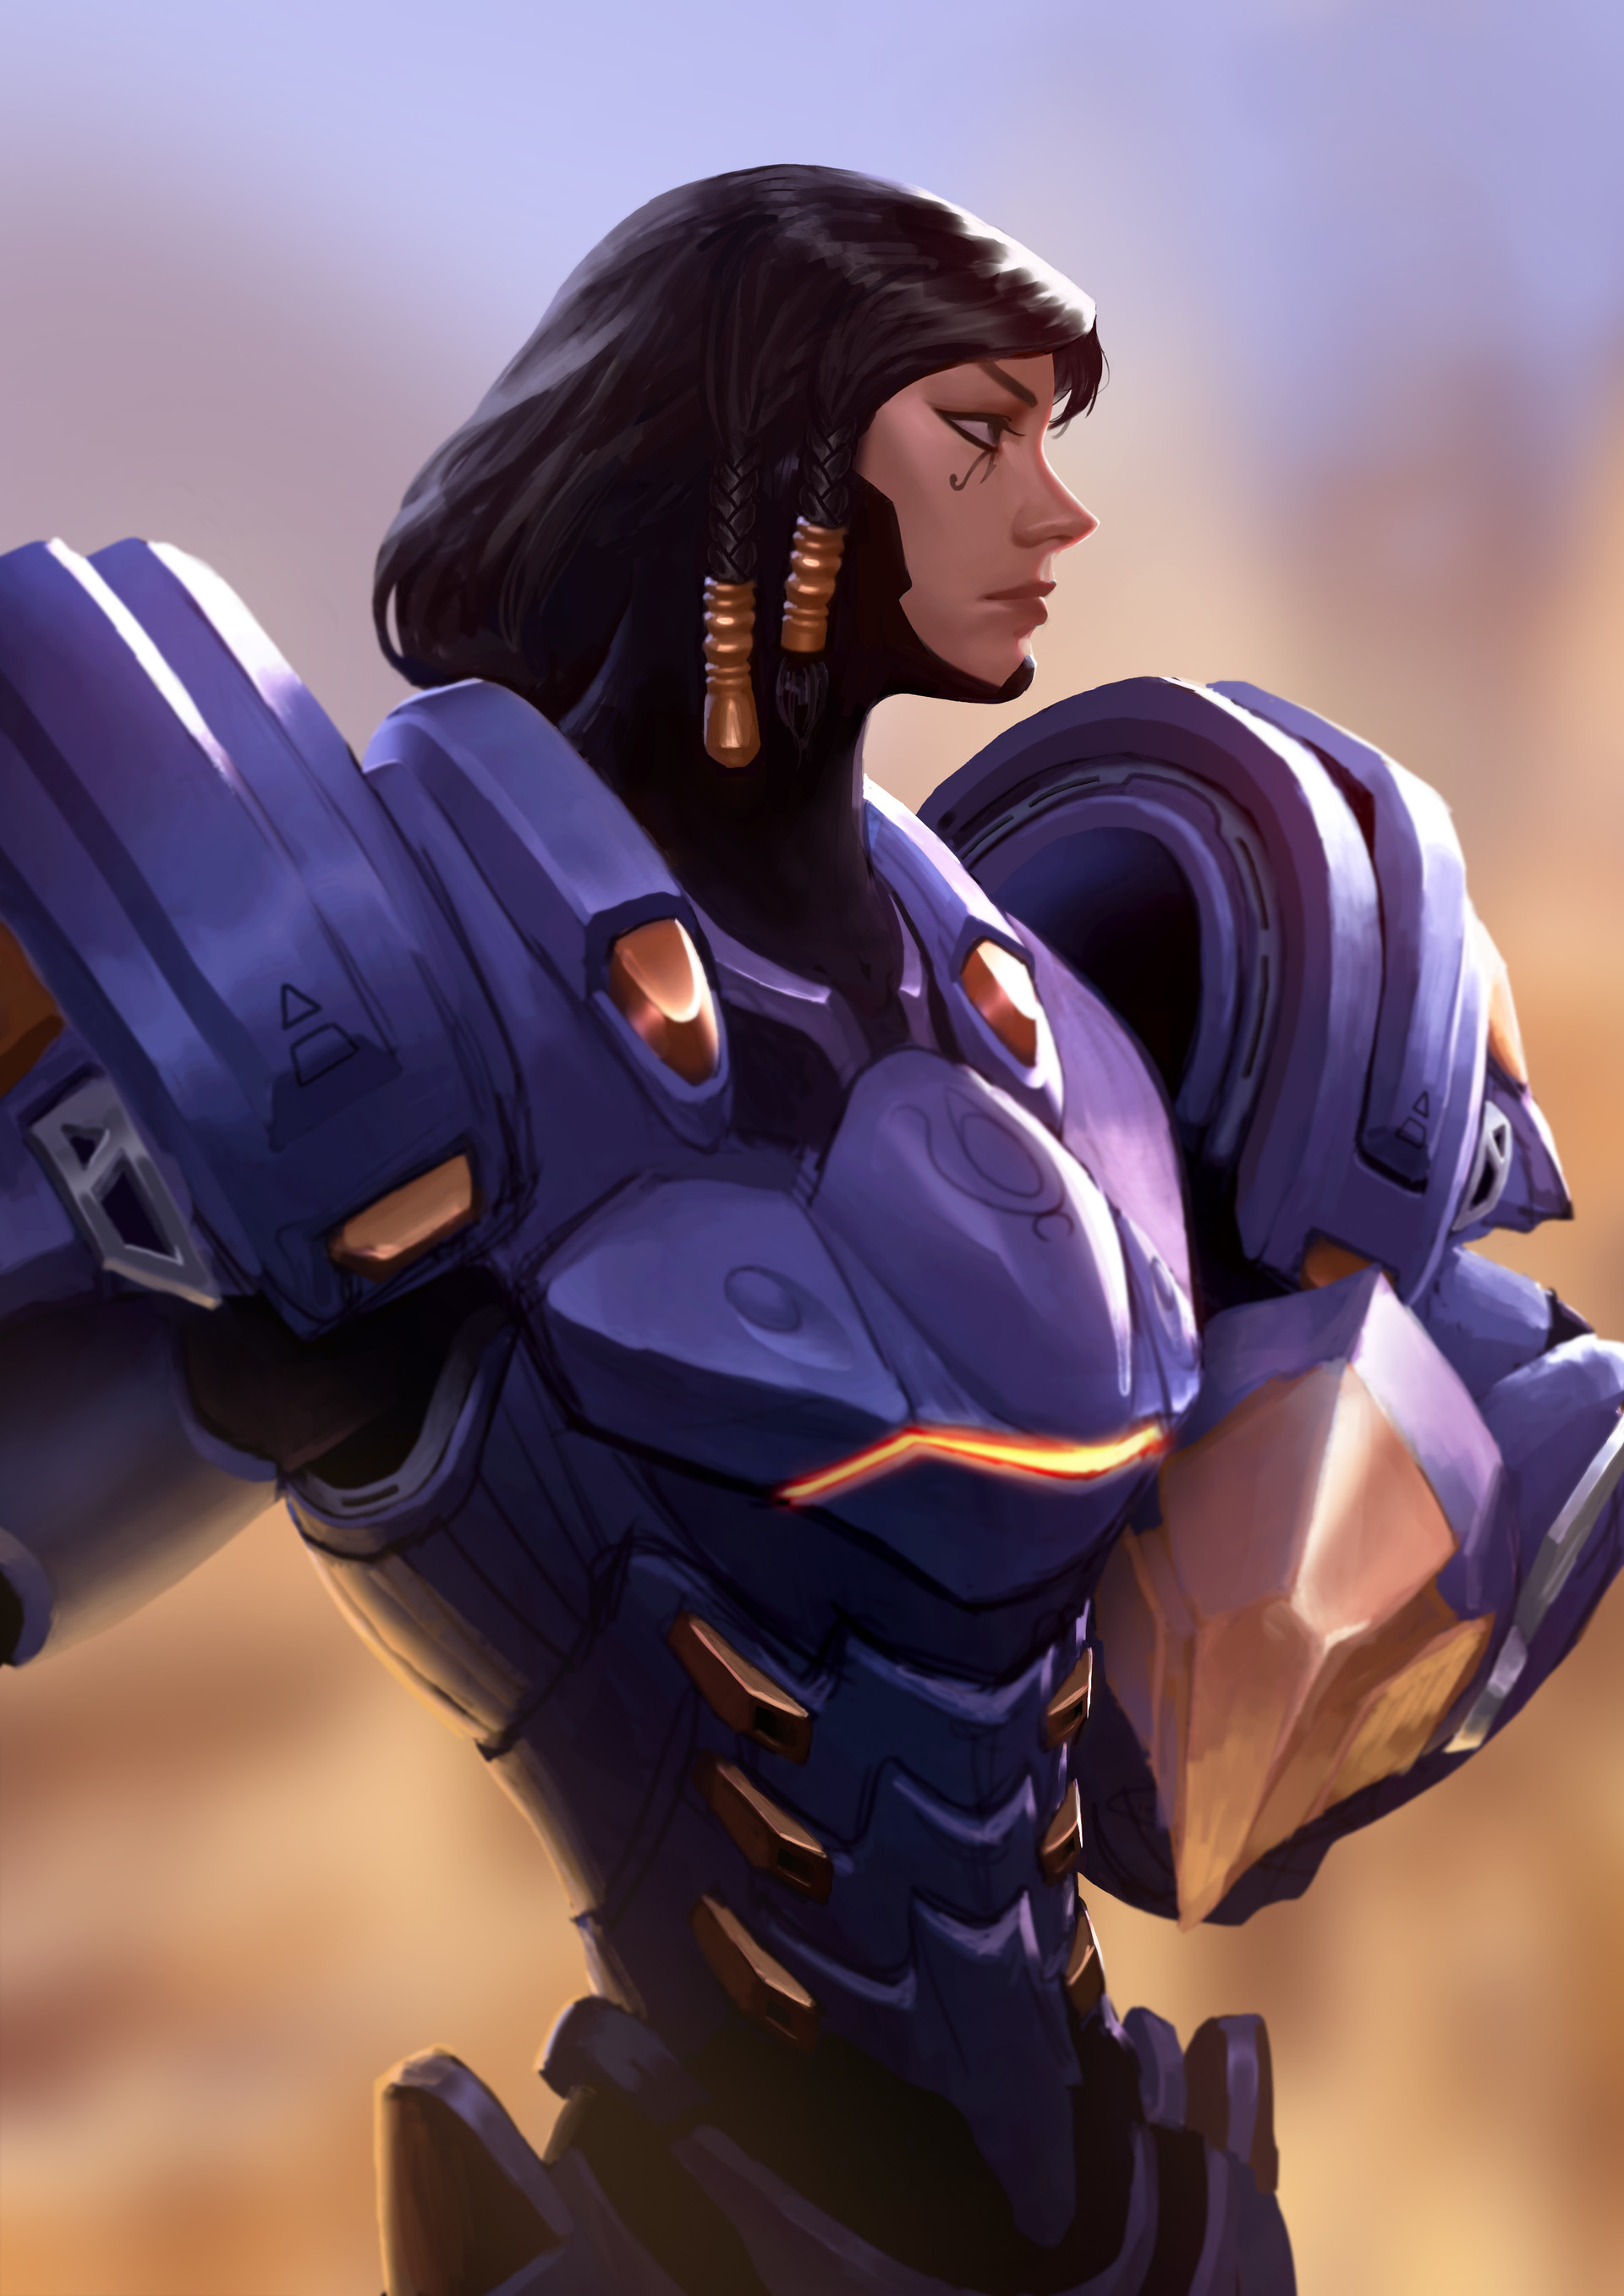 General 1920x2715 Overwatch futuristic armor Pharah (Overwatch) Blizzard Entertainment video games video game characters